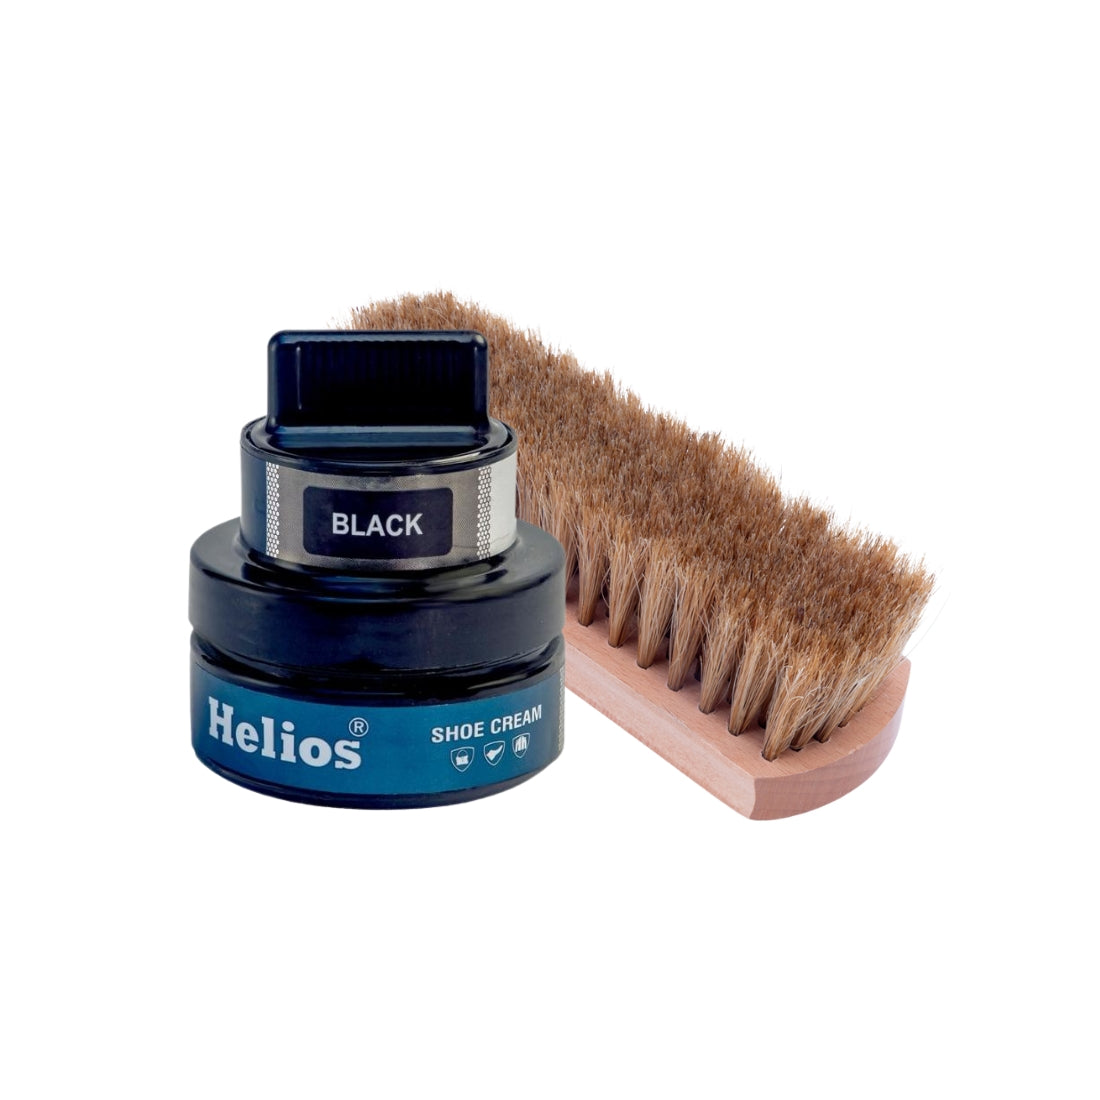 Helios Shoe Cream Glass Jar with Applicator with Helios Horse Hair Shoe Brush - (Light Brown, 6.5 Inch)